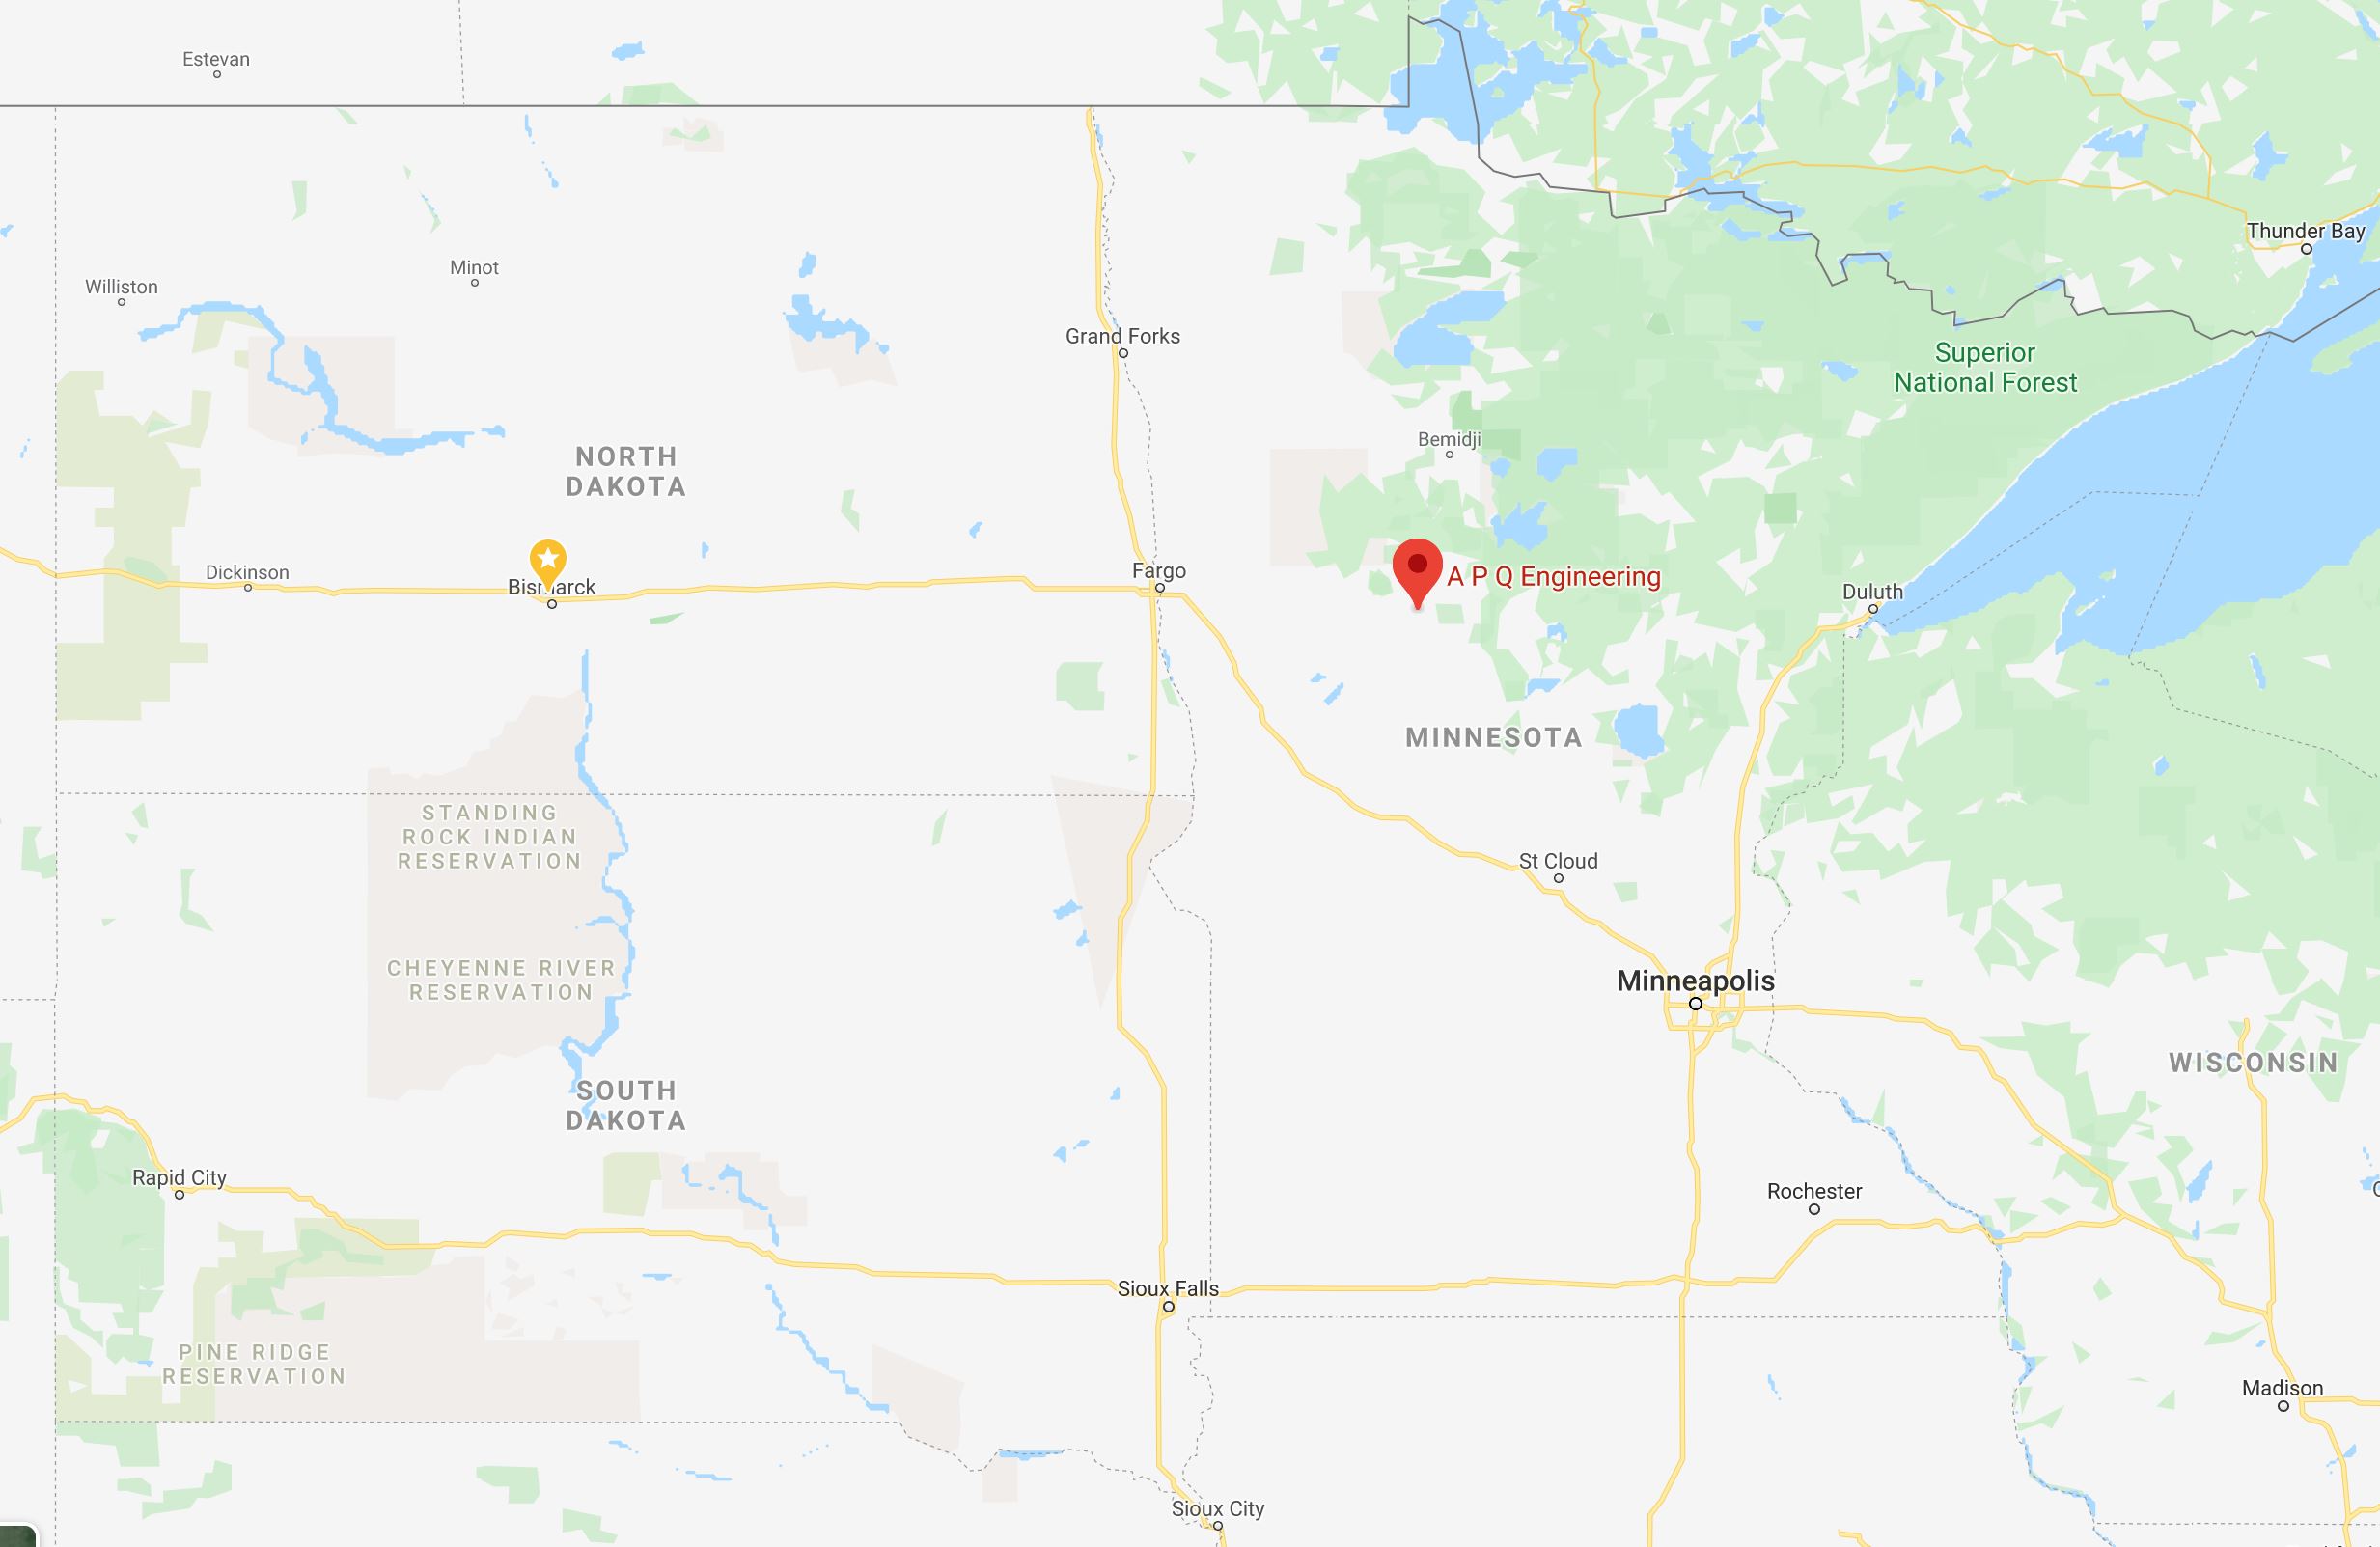 Map with pin showing APQ Engineering in Northern Minnesota